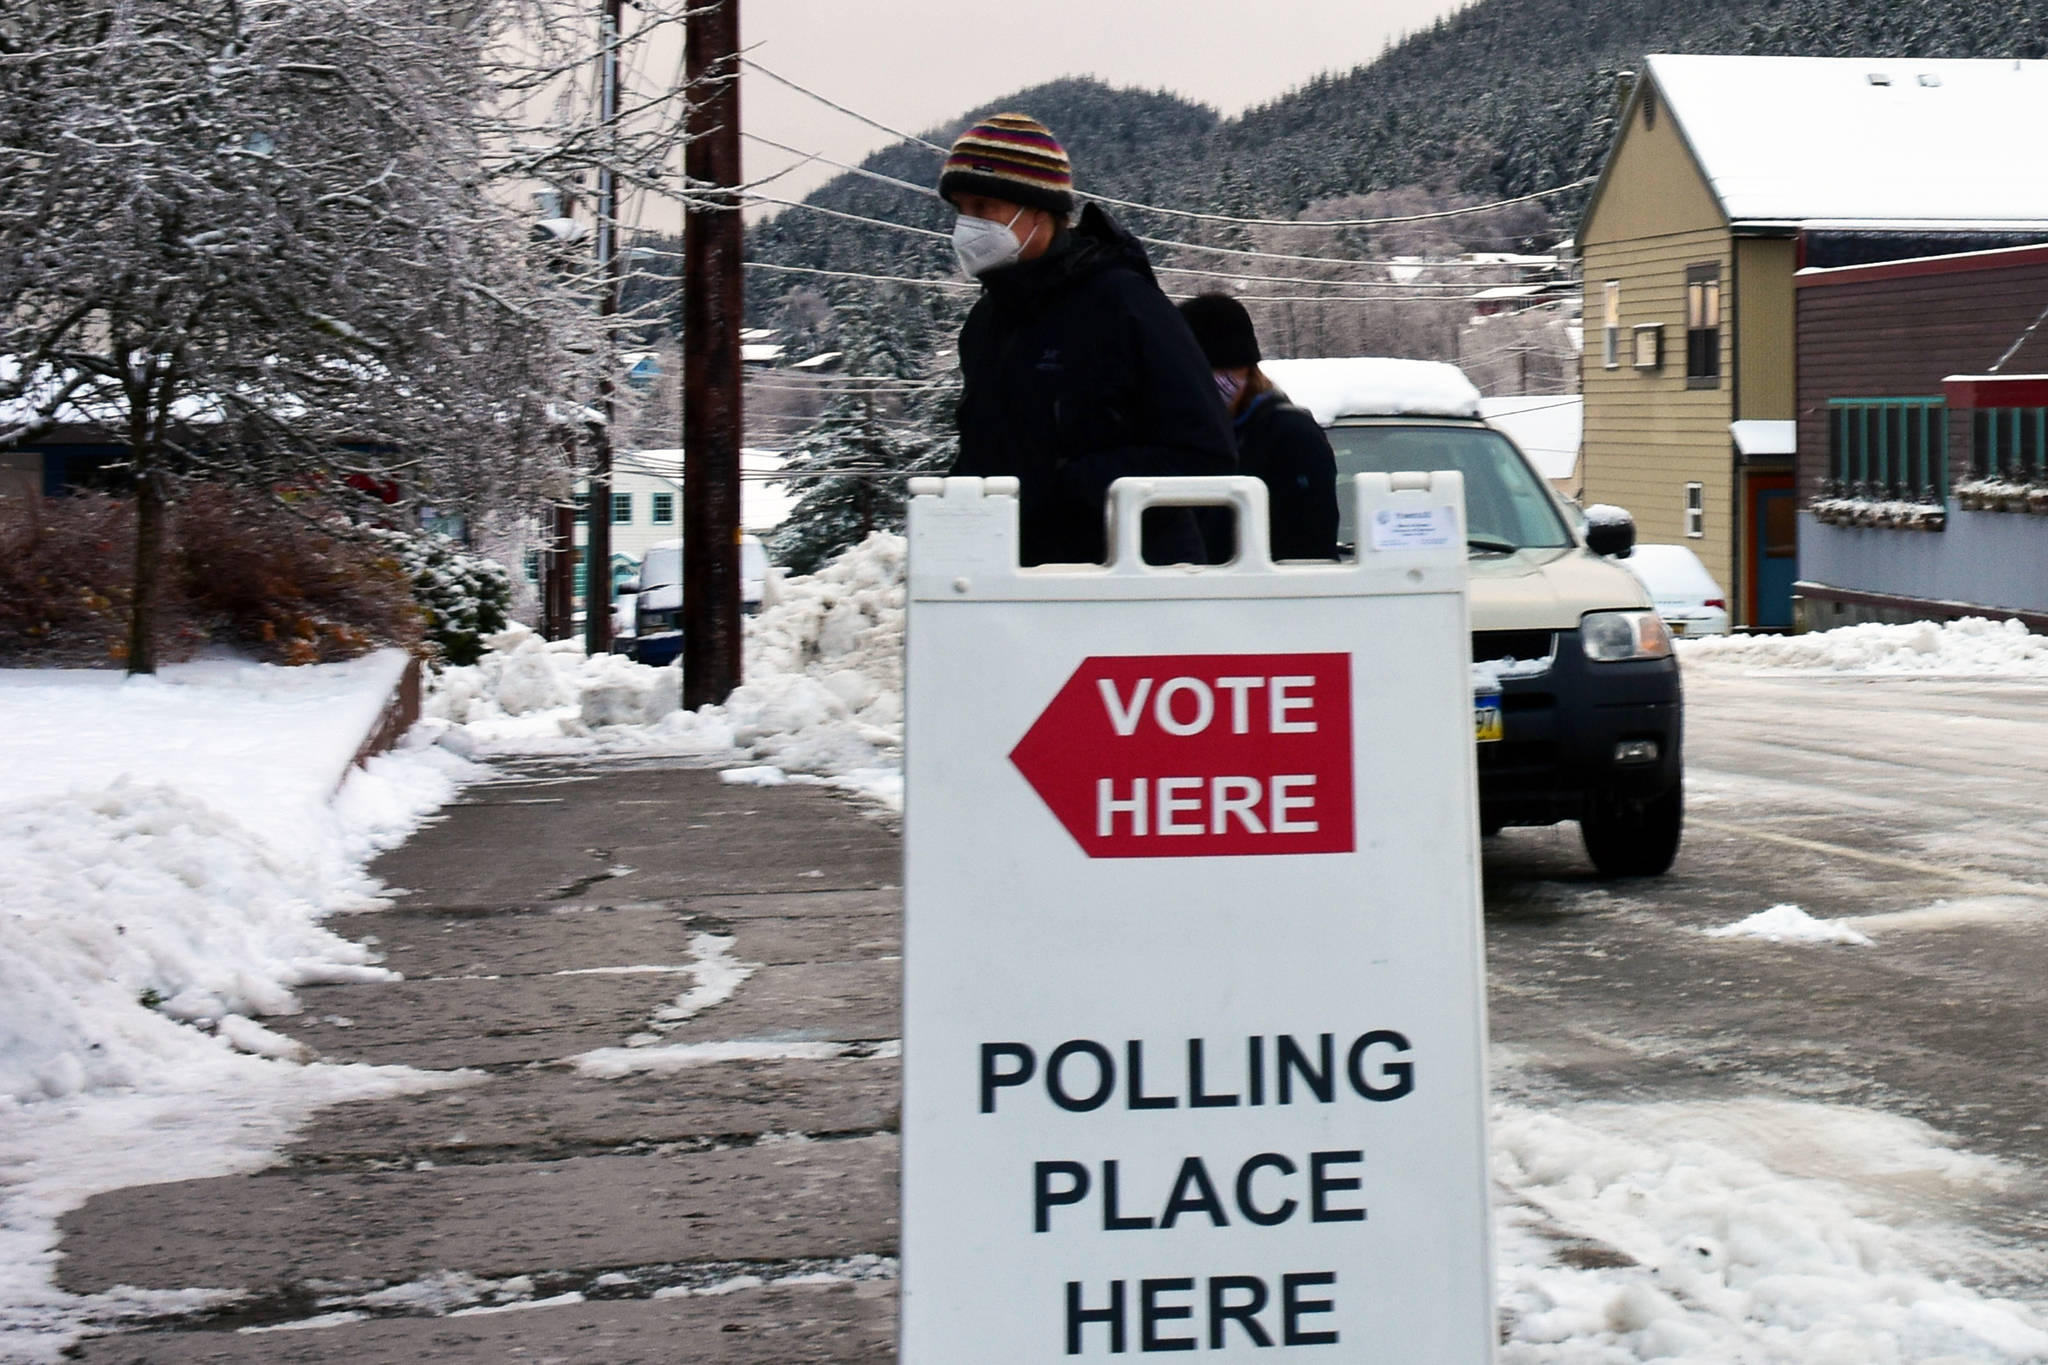 Juneauites head into the Douglas Community Building to vote in the 2020 General Election on Tuesday, Nov. 3, 2020. The Alaska Division of Elections certified the results of the election on Dec. 1. (Peter Segall / Juneau Empire)